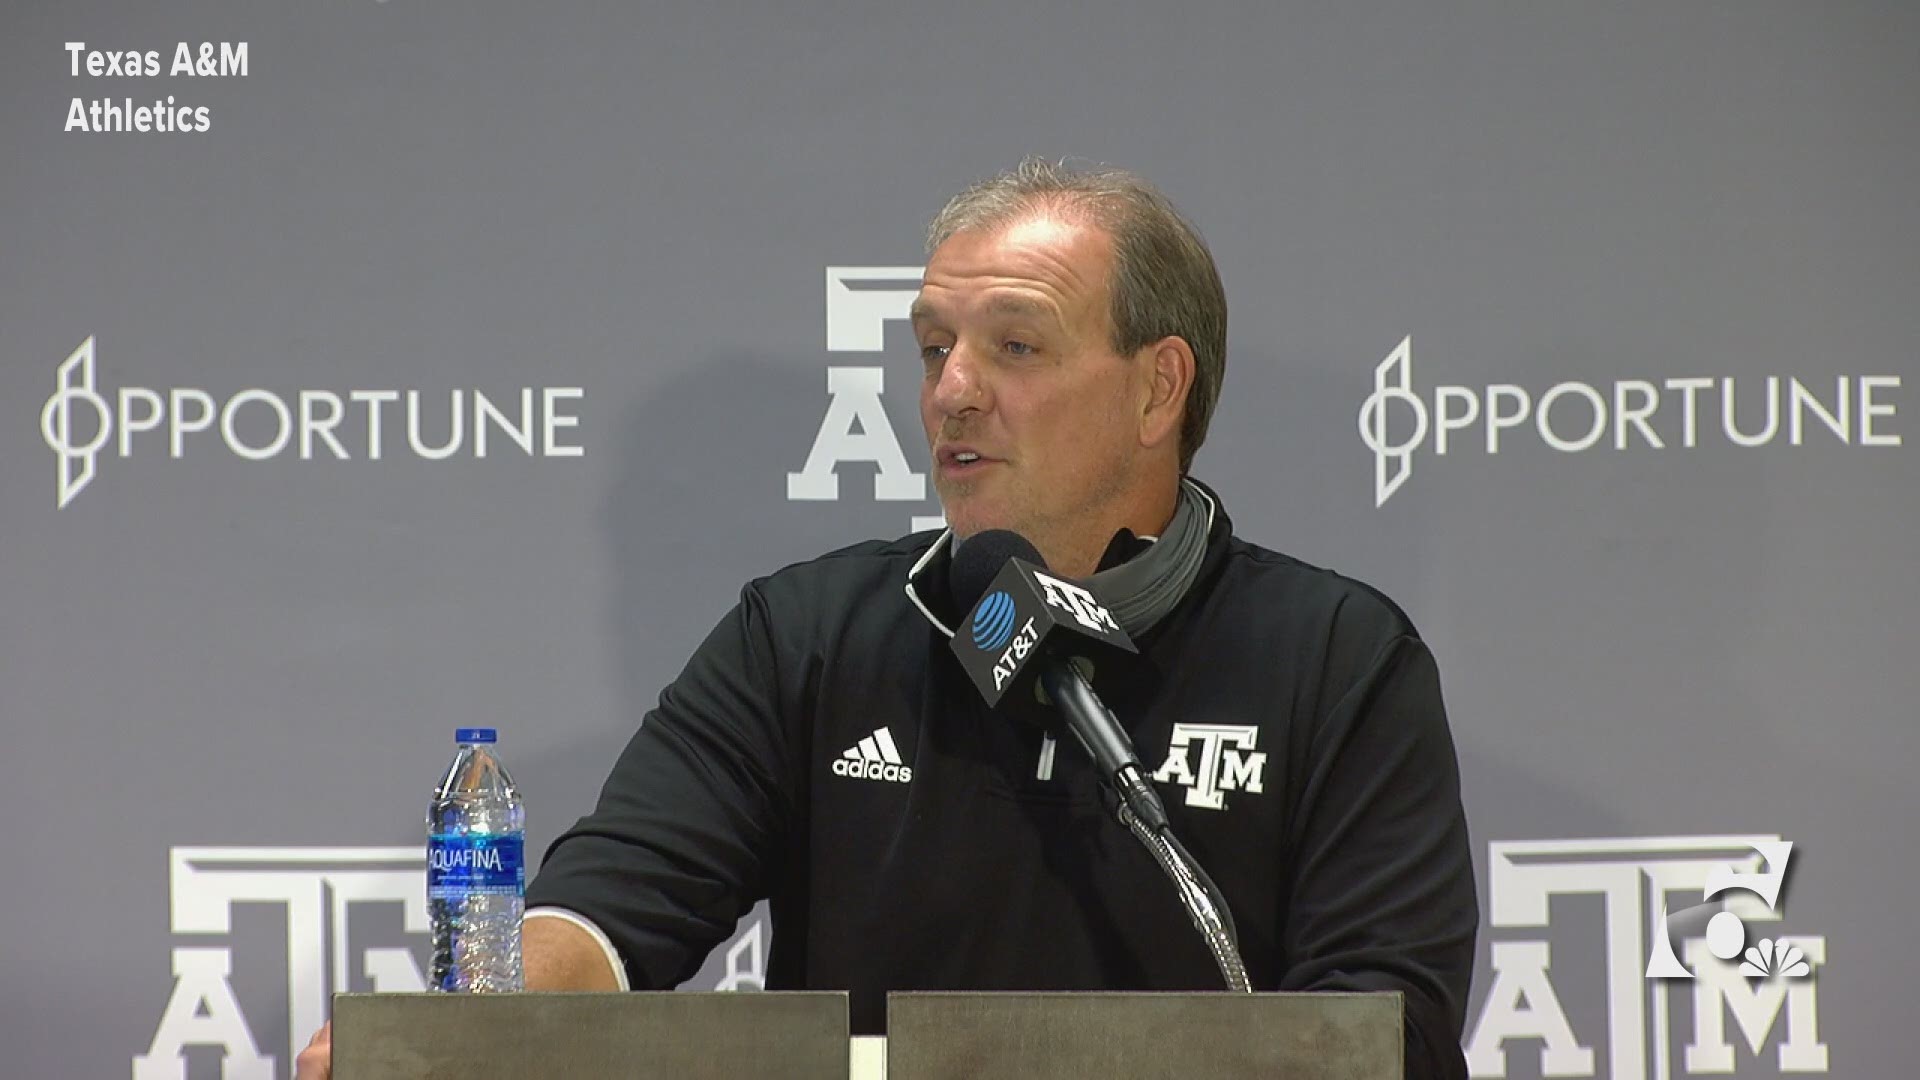 After the NCAA announced a blanket eligibility waiver for fall athletes, Texas A&M coach Jimbo Fisher described it as "fair."